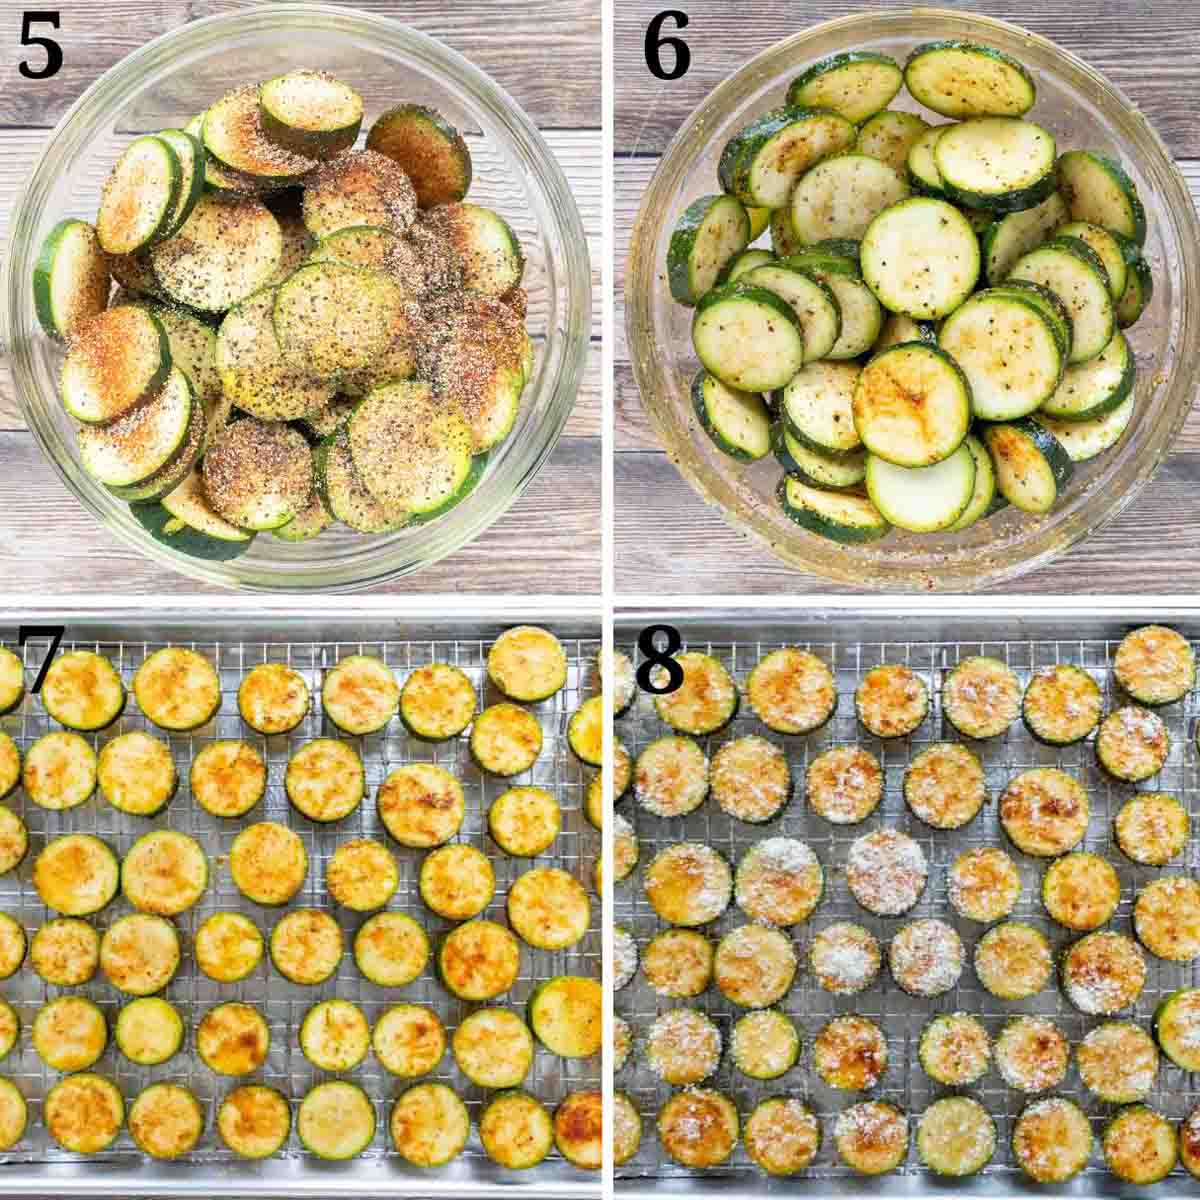 Collage showing how to finish making recipe.